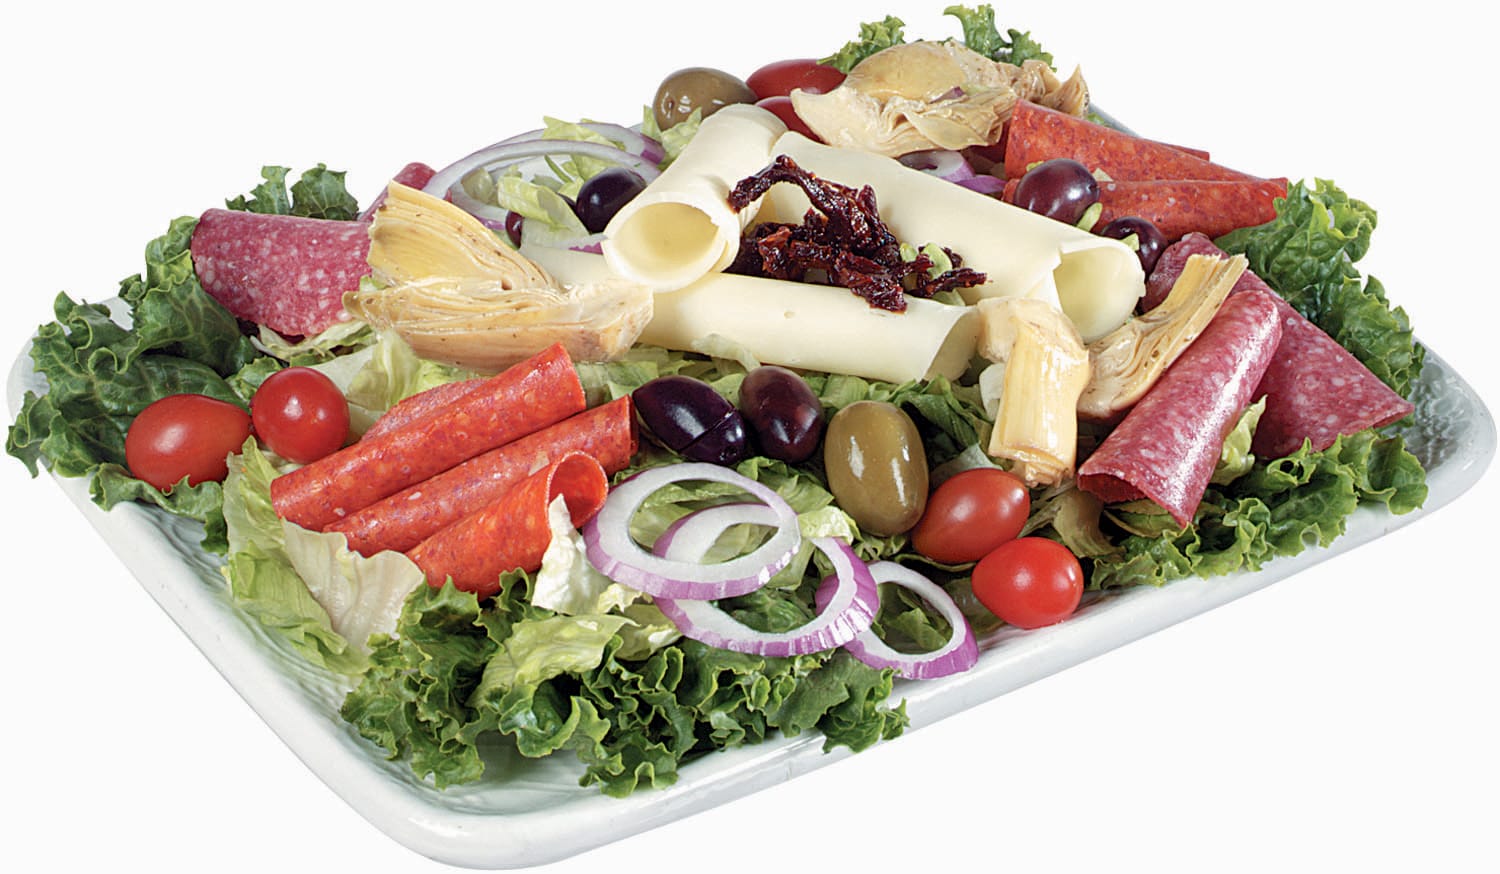 Antipasto on a Dish Food Picture